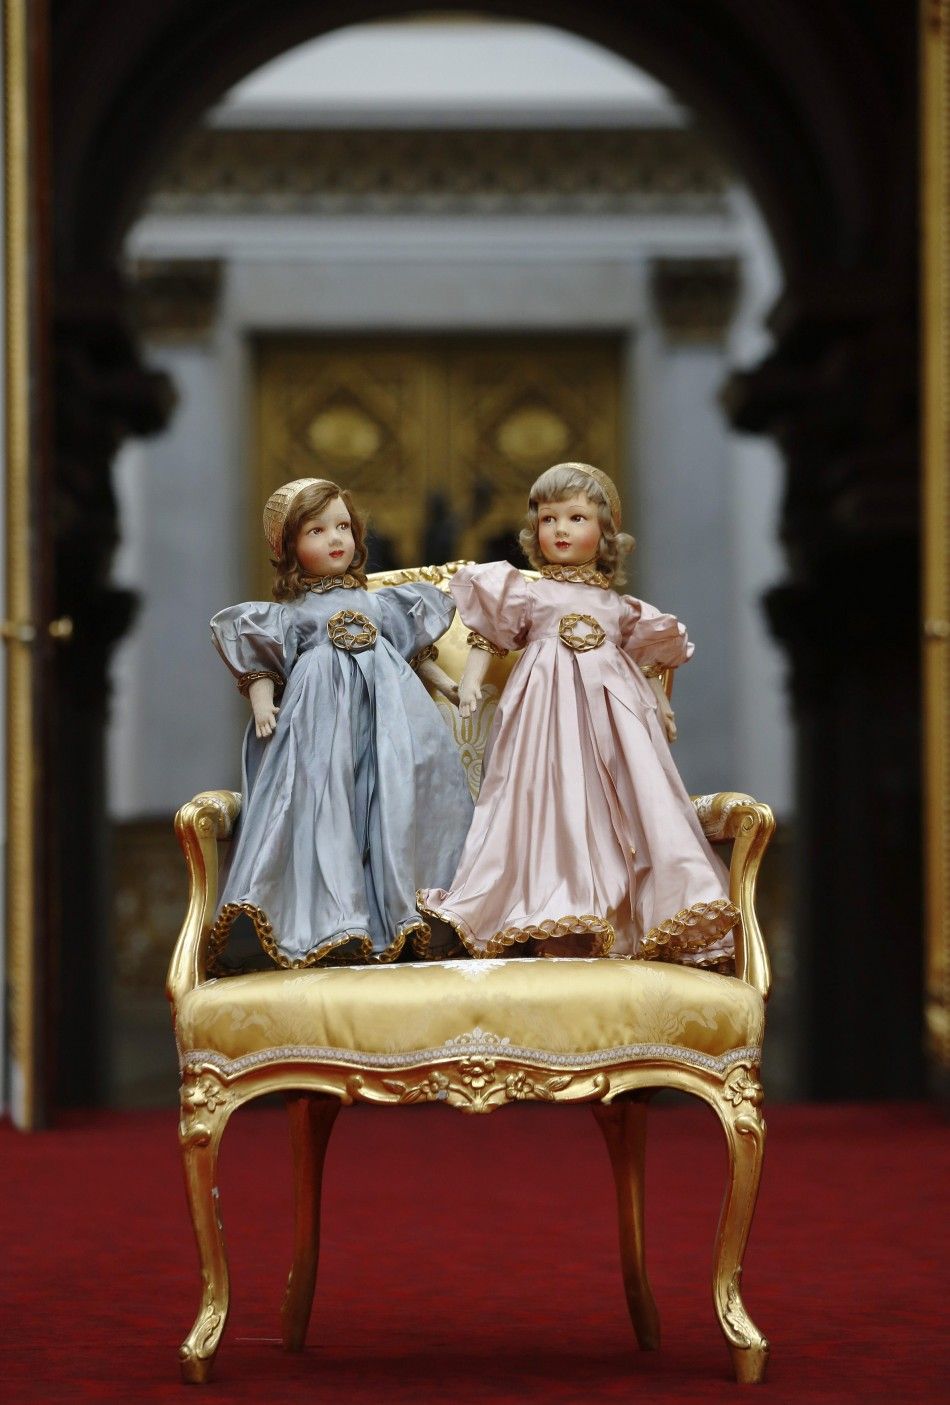 A pair of Parisian dolls belonging to Britains Queen Elizabeth and her sister Princess Margaret, are seen at Buckingham Palace in London